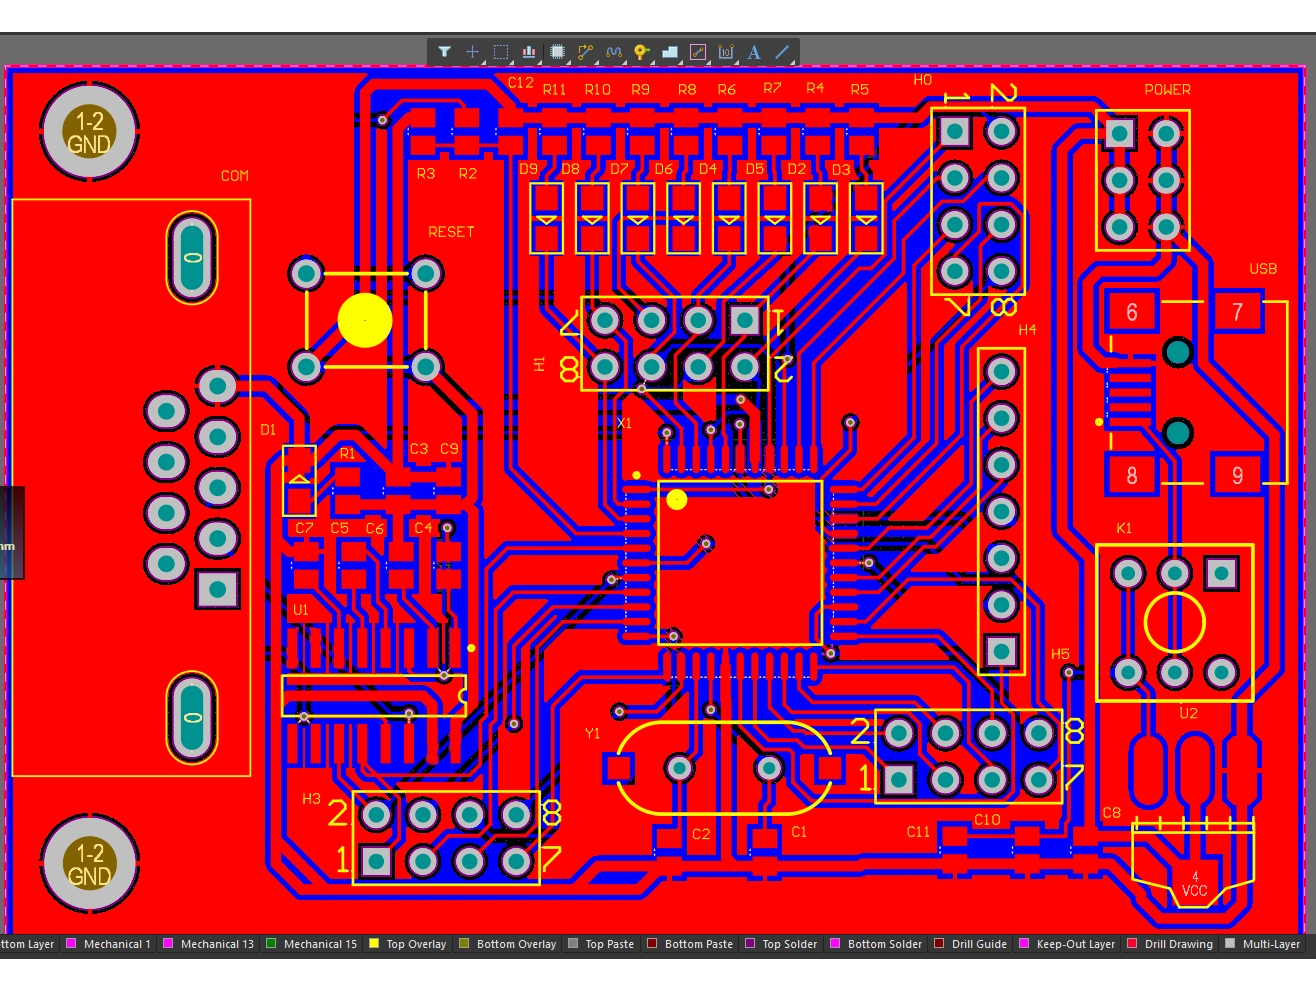 PCB Copper Laying in Circuit Board Design